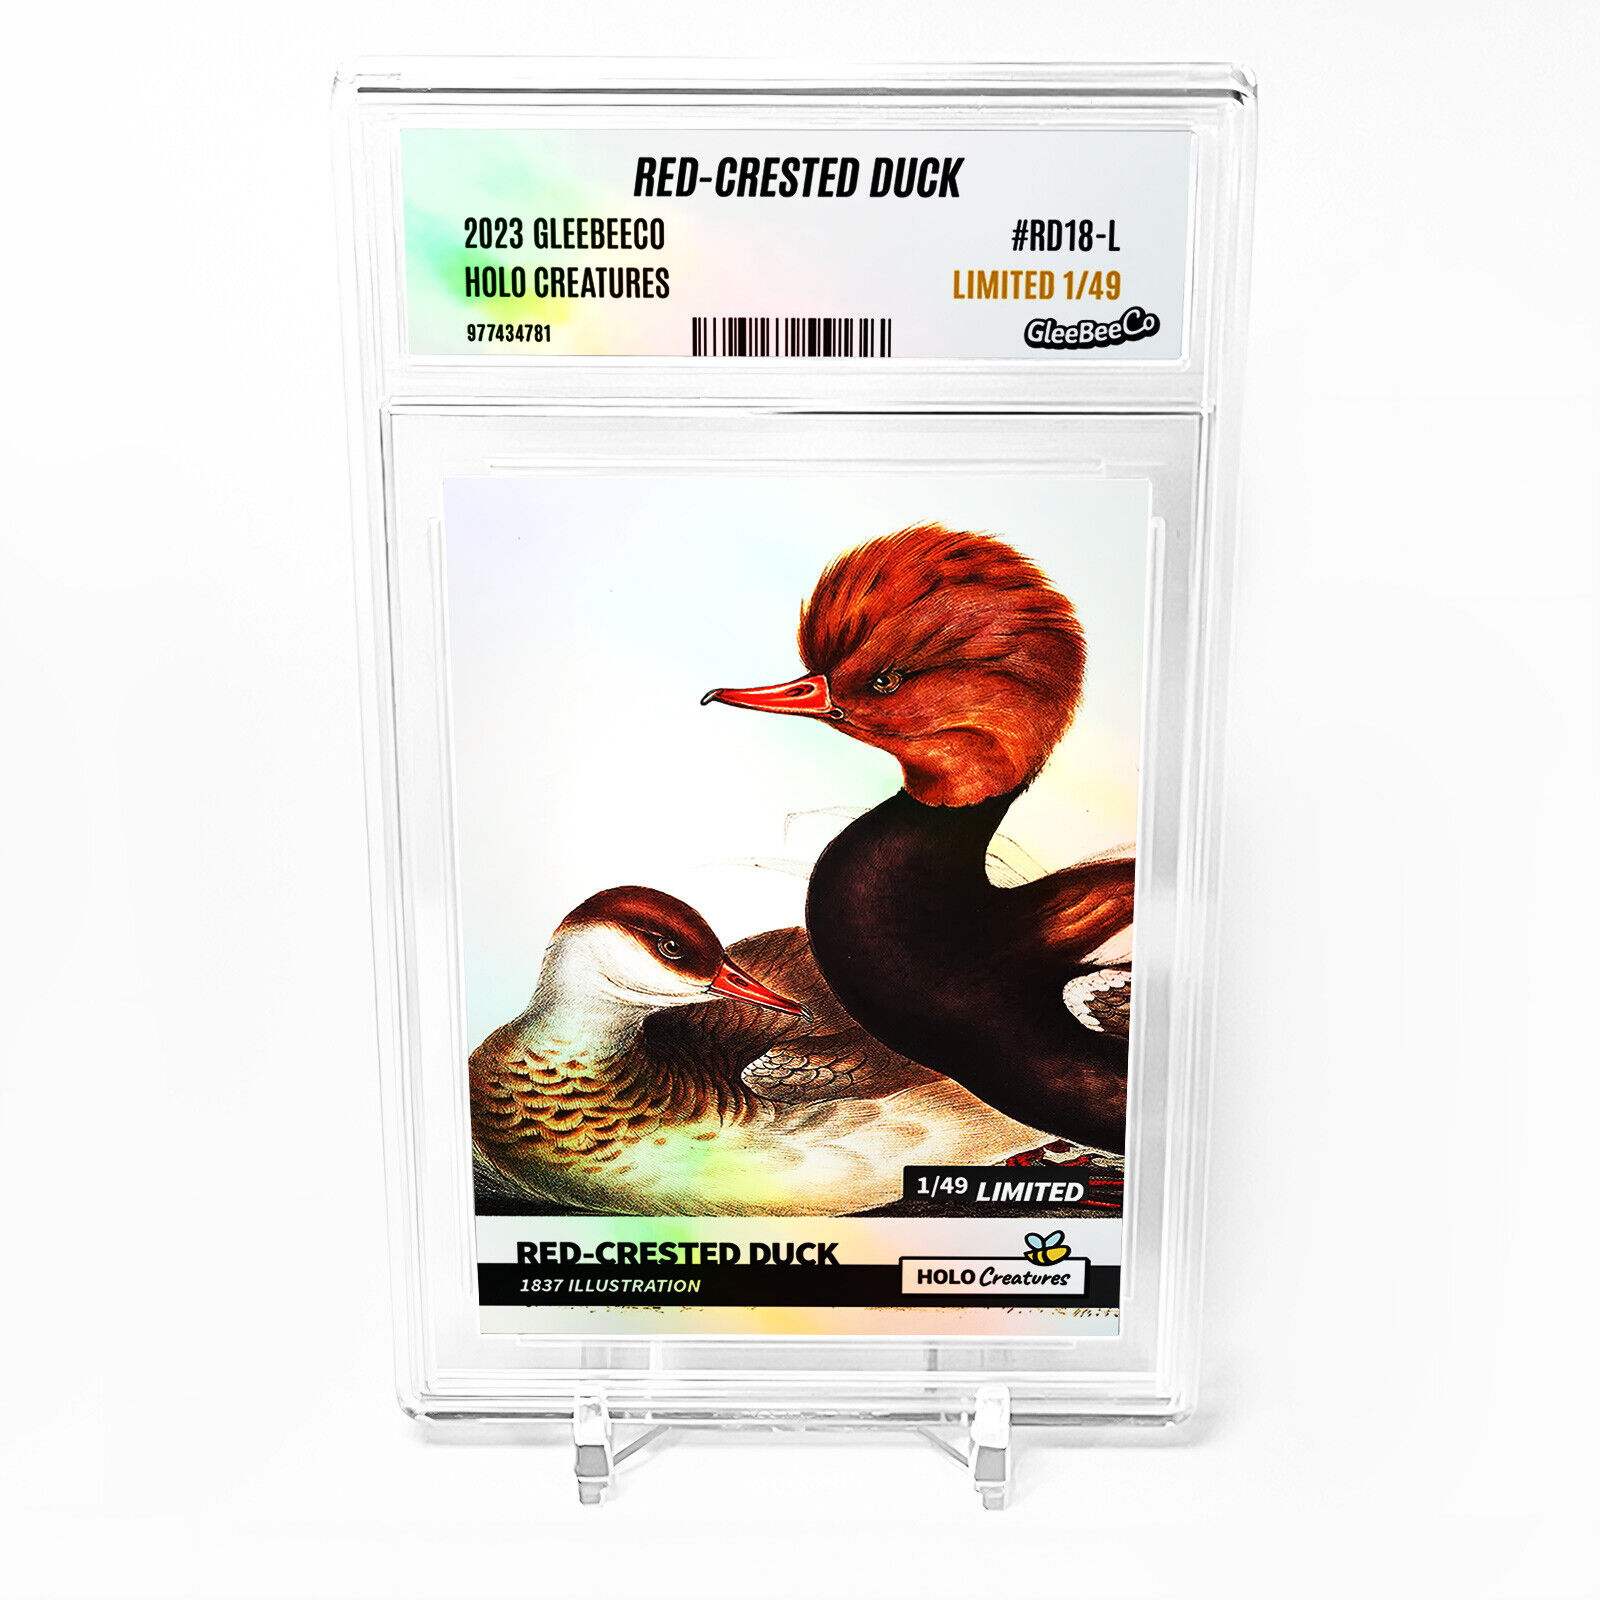 RED-CRESTED DUCK Card 2023 GleeBeeCo Holo Creatures #RD18-L Limited to Only /49